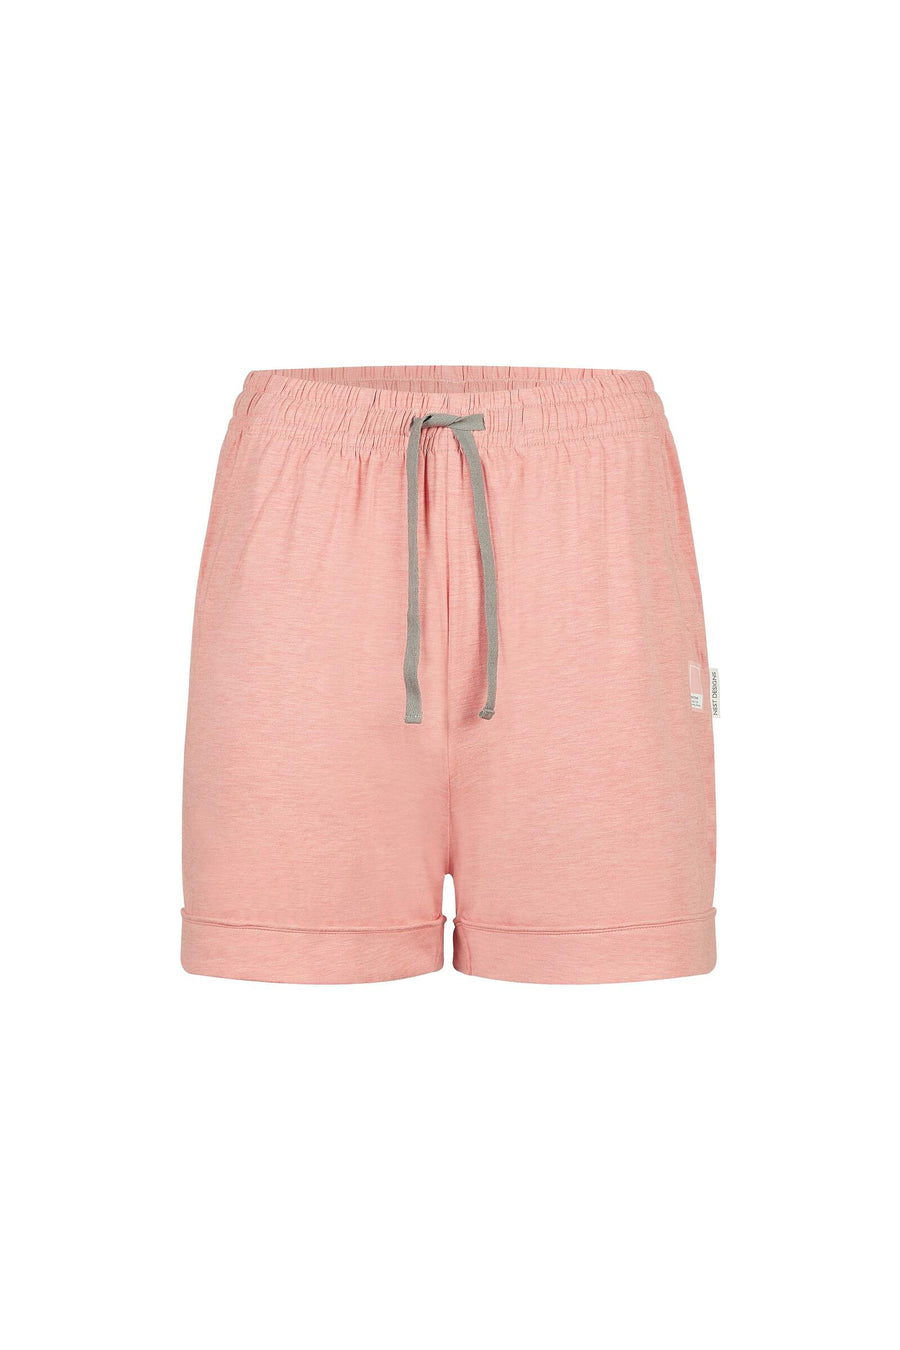 Women's Bamboo Jersey Shorts in Coral Almond